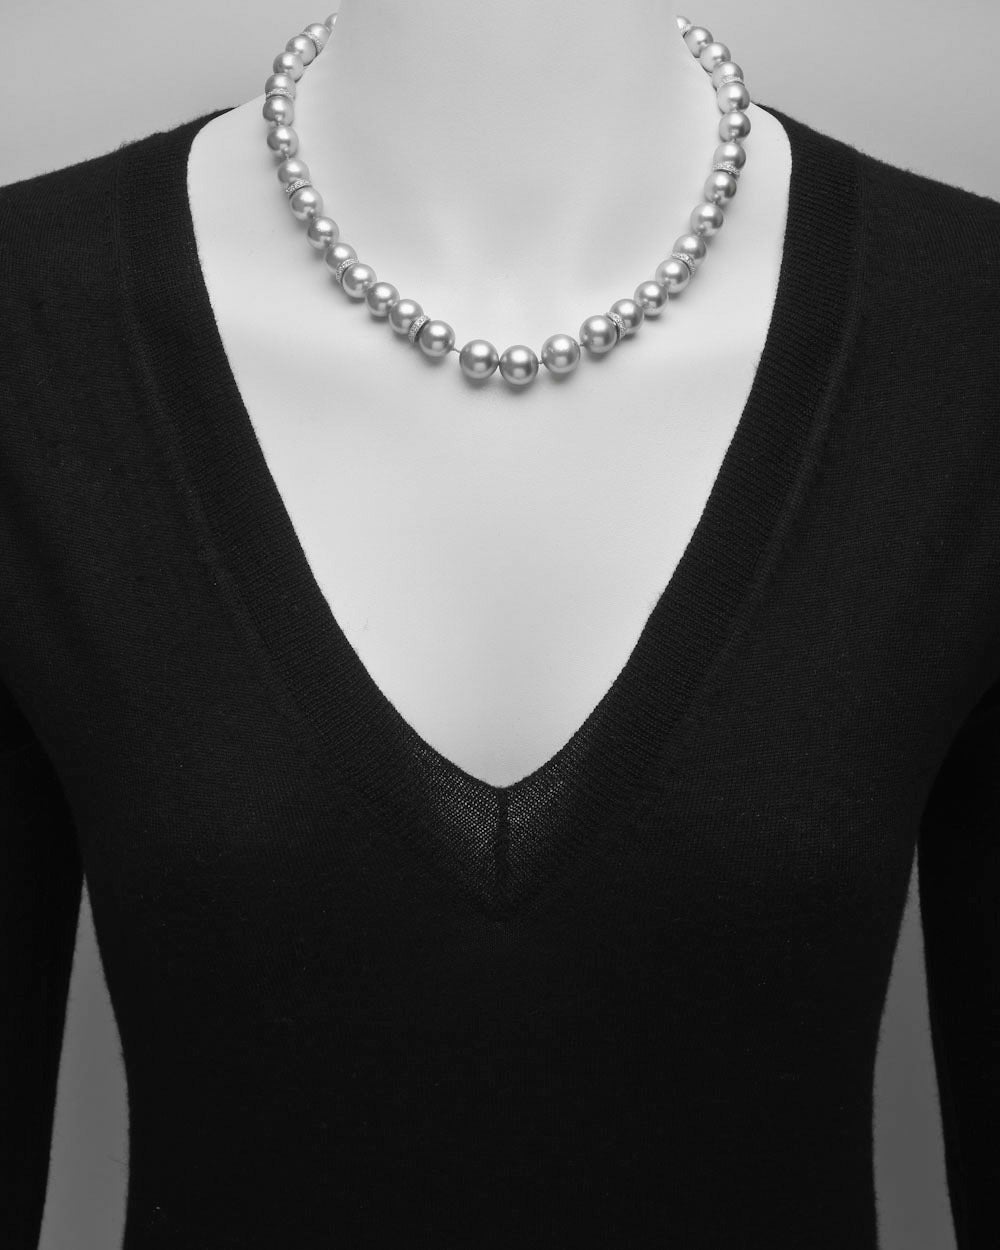 Gray pearl and diamond necklace, composed of 41 fine cultured pearls ranging from 8.5 to 10.5mm in diameter, accented by diamond-set rondels in 18k white gold, the pearls strung on a silk cord and secured by a pavé-set diamond flower clasp in 18k